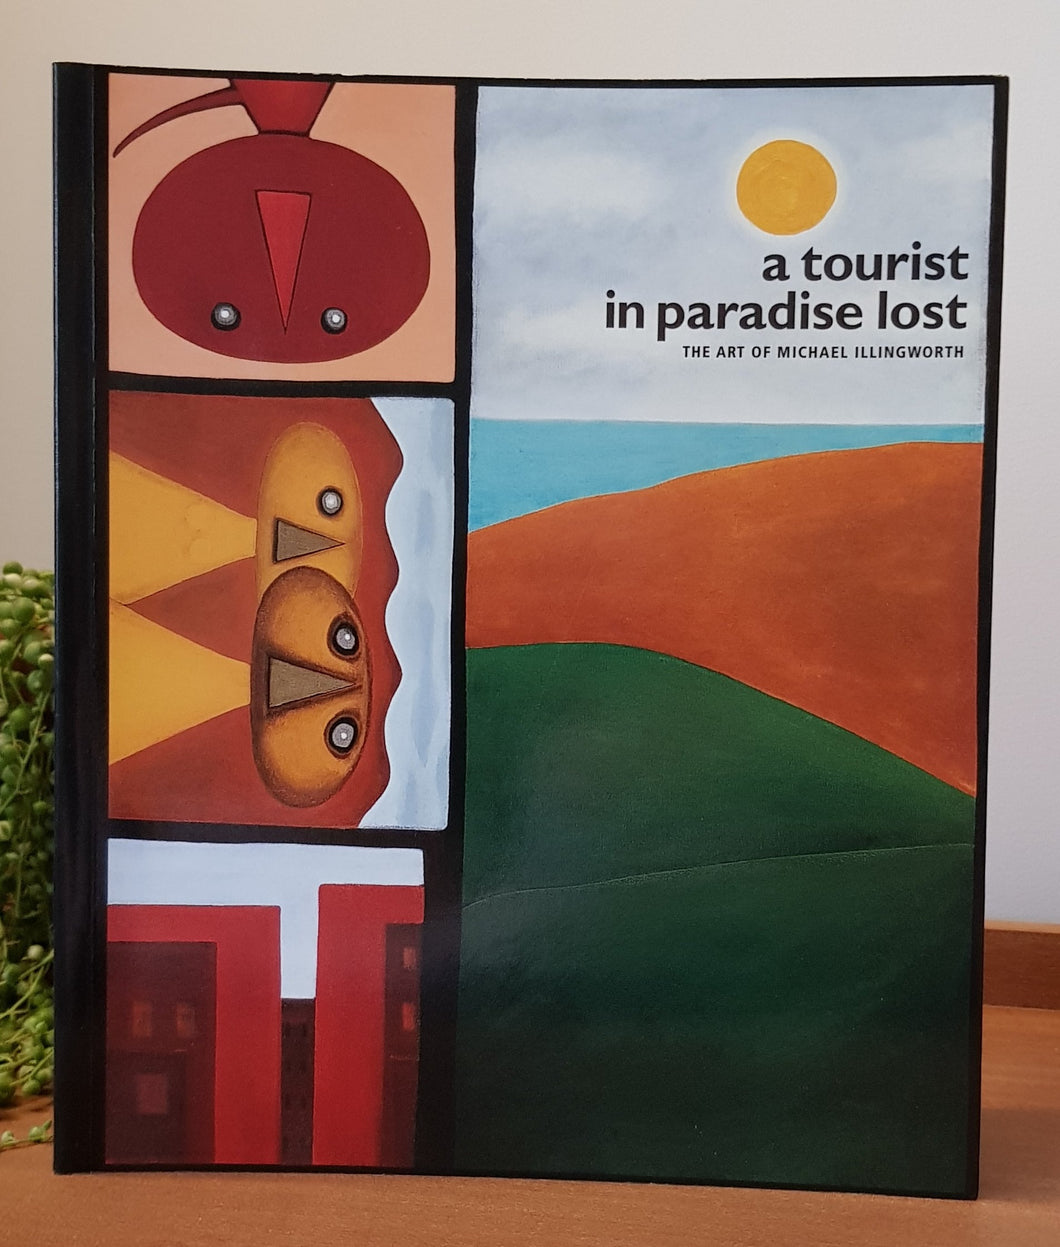 A Tourist in Paradise Lost: The Art of Michael Illingworth by Kevin Ireland, Aaron Lister, Damian Skinner